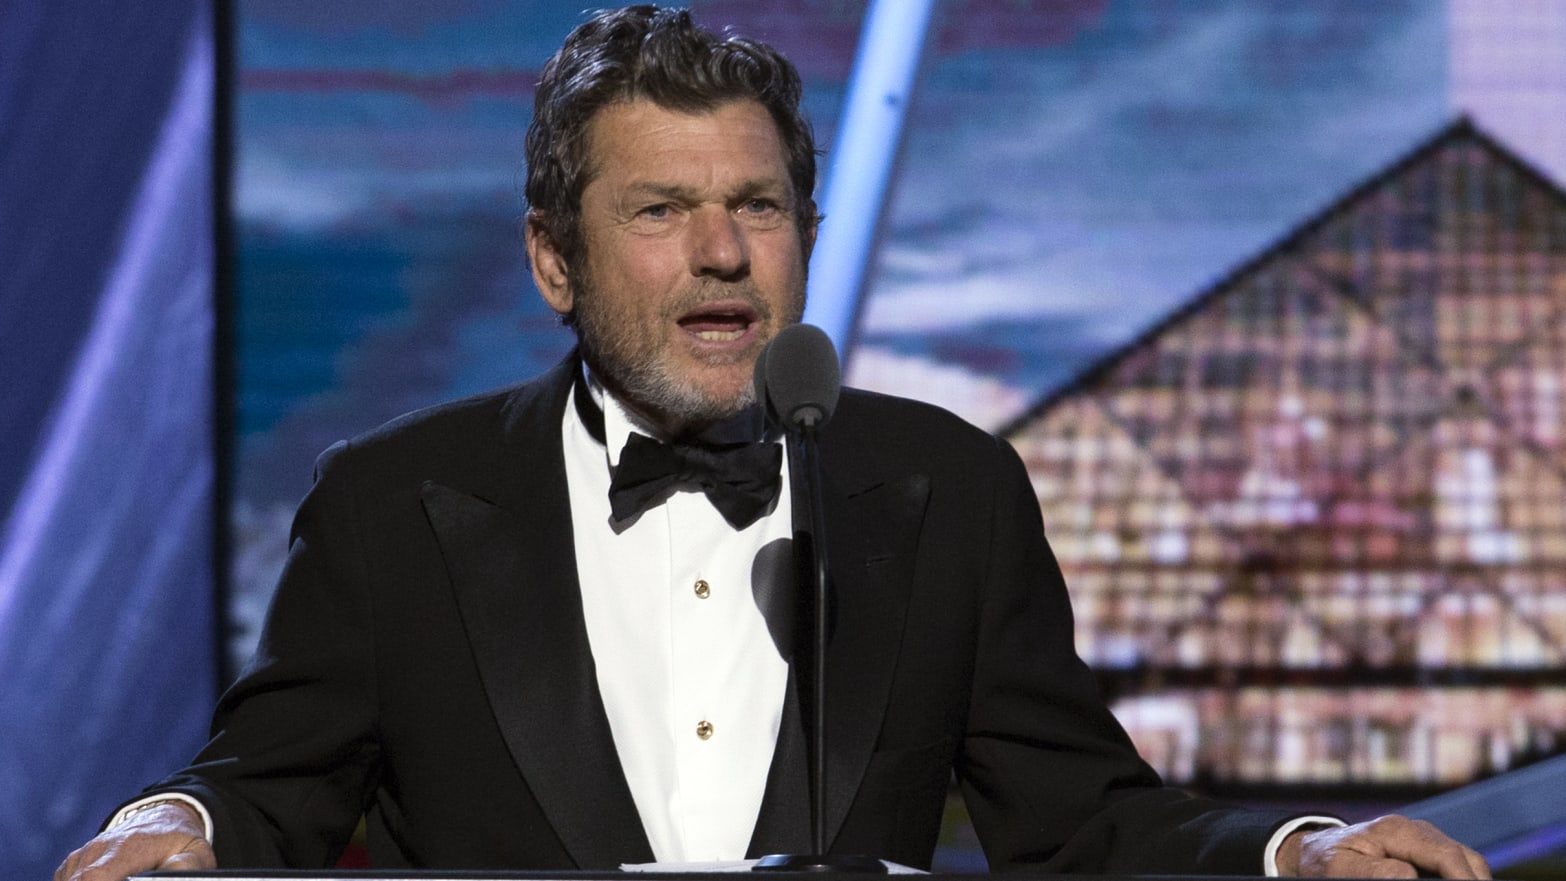 Jann Wenner, co-founder and publisher of Rolling Stone magazine, speaks during the 29th annual Rock and Roll Hall of Fame Induction Ceremony.